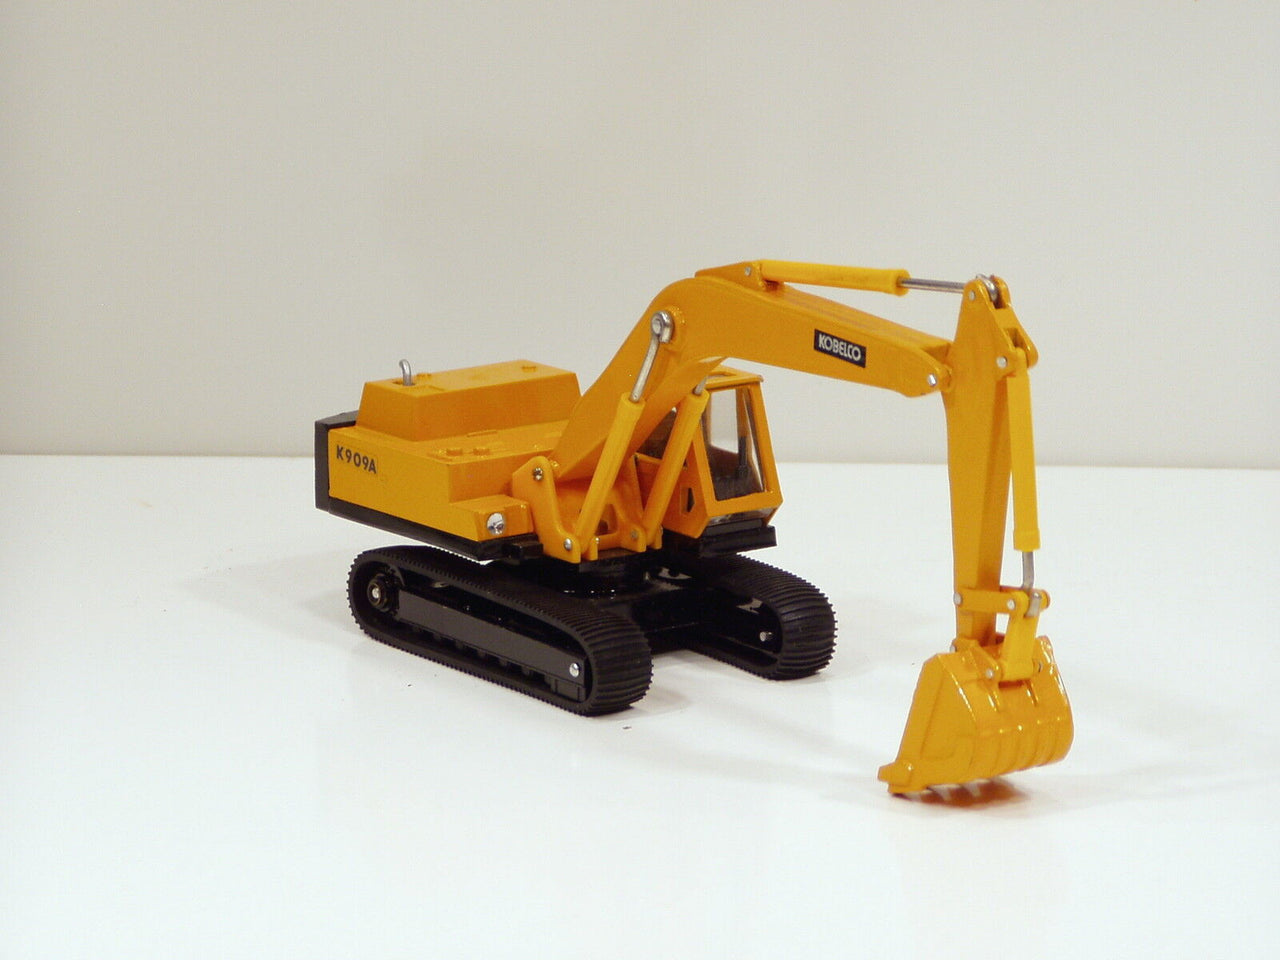 ASM02 Kobelco K909A Tracked Excavator 1:50 Scale (Discontinued Model)